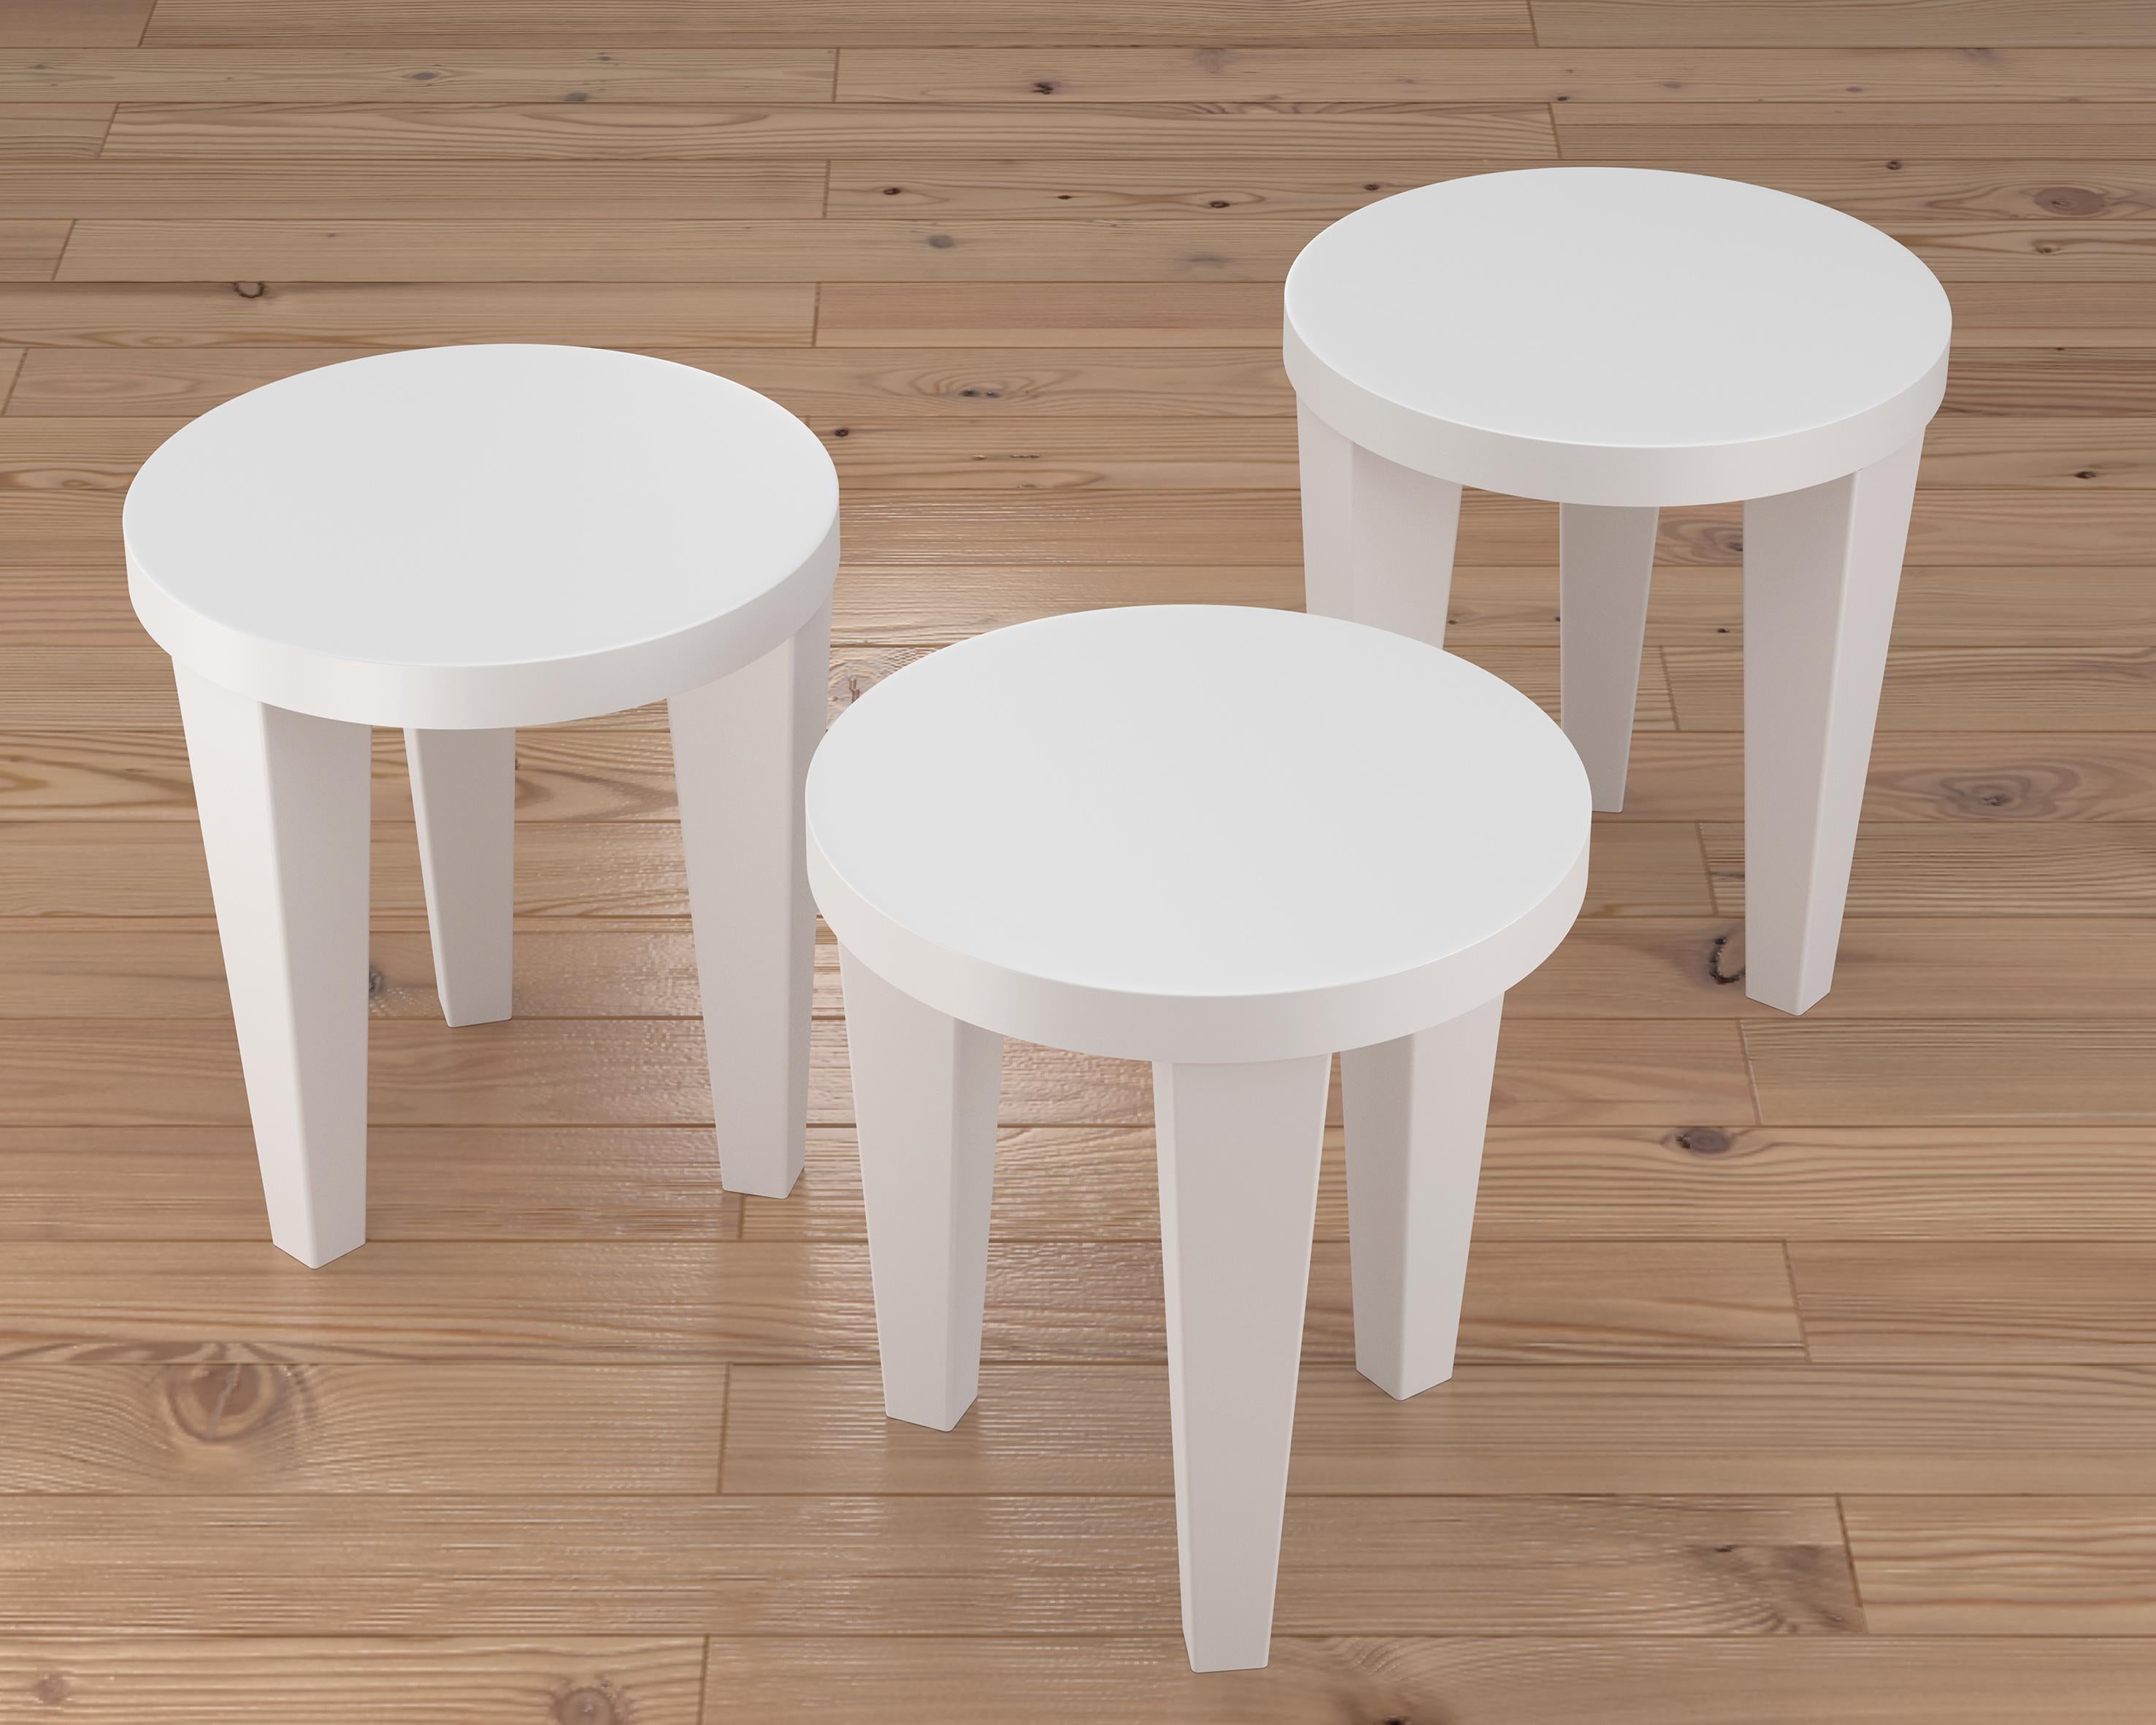 Bob is a contemporary stool suitable as a seat, a side table or a storage unit.

Its geometric structure comprises a round seat supported by three sculptural-section legs.

Bob is entirely made of wood and handcrafted in Italy.

Bob is available in